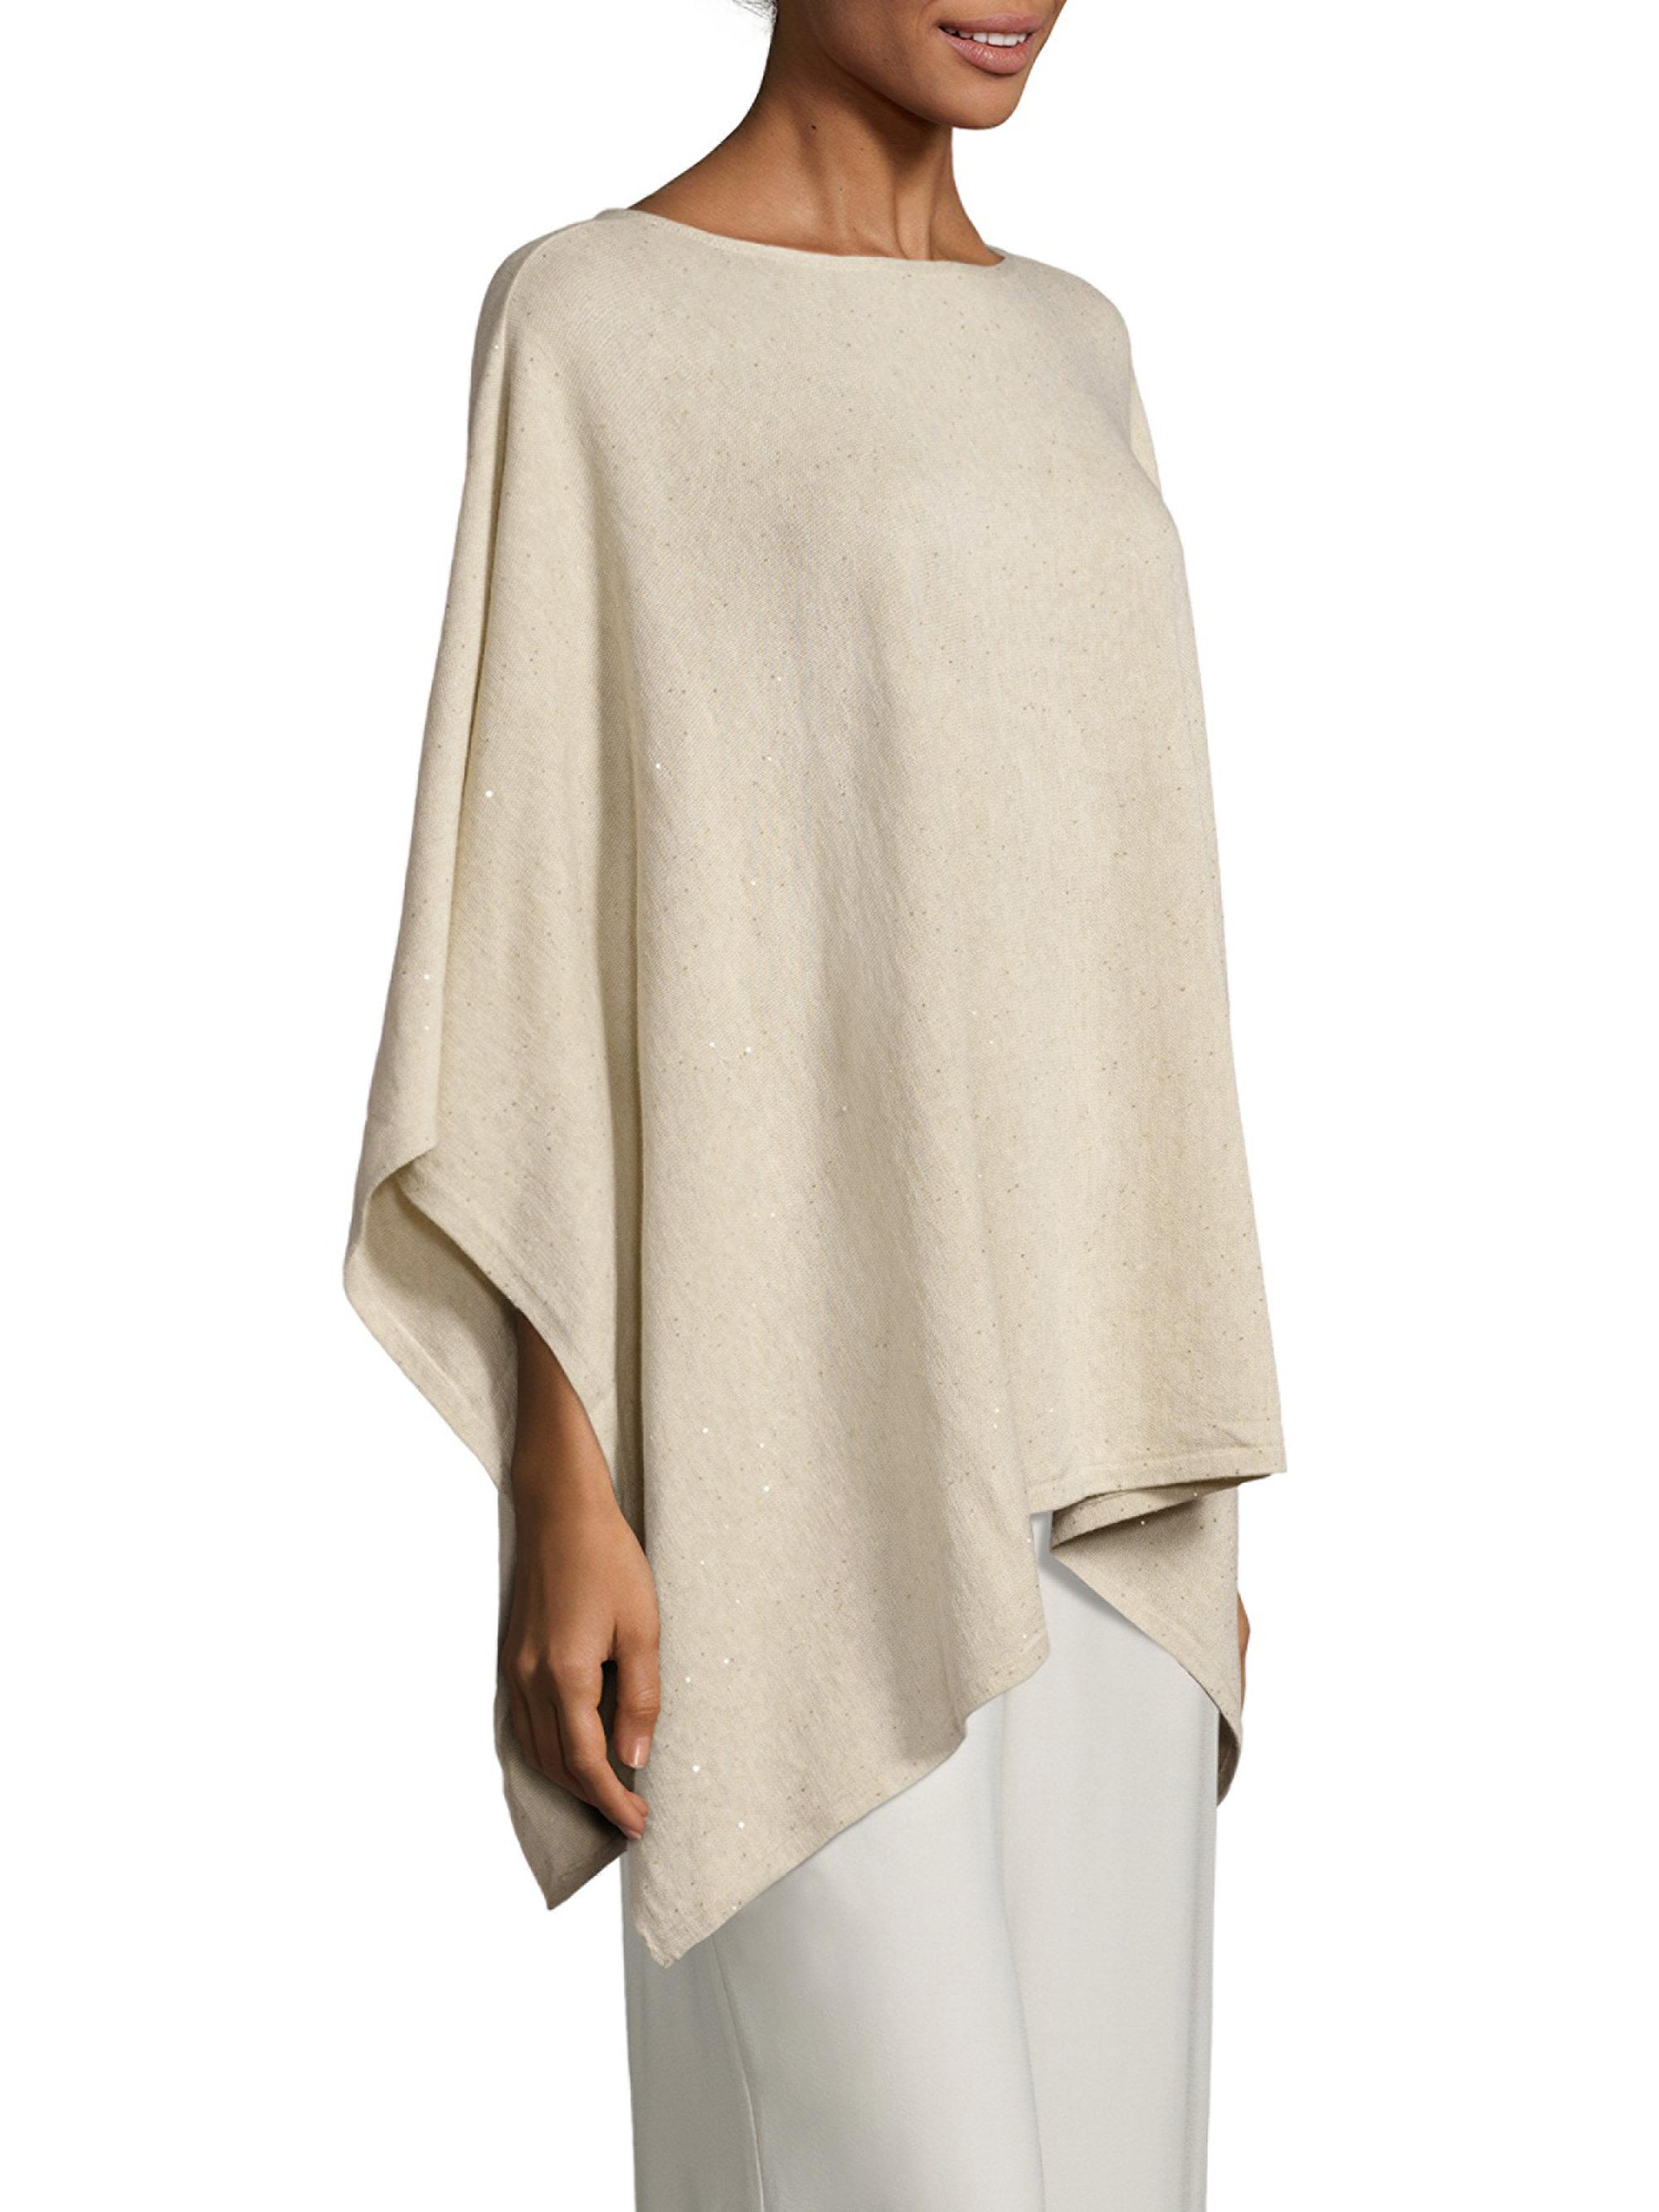 Eileen Fisher Silk Blend Sequin Poncho in Natural - Lyst